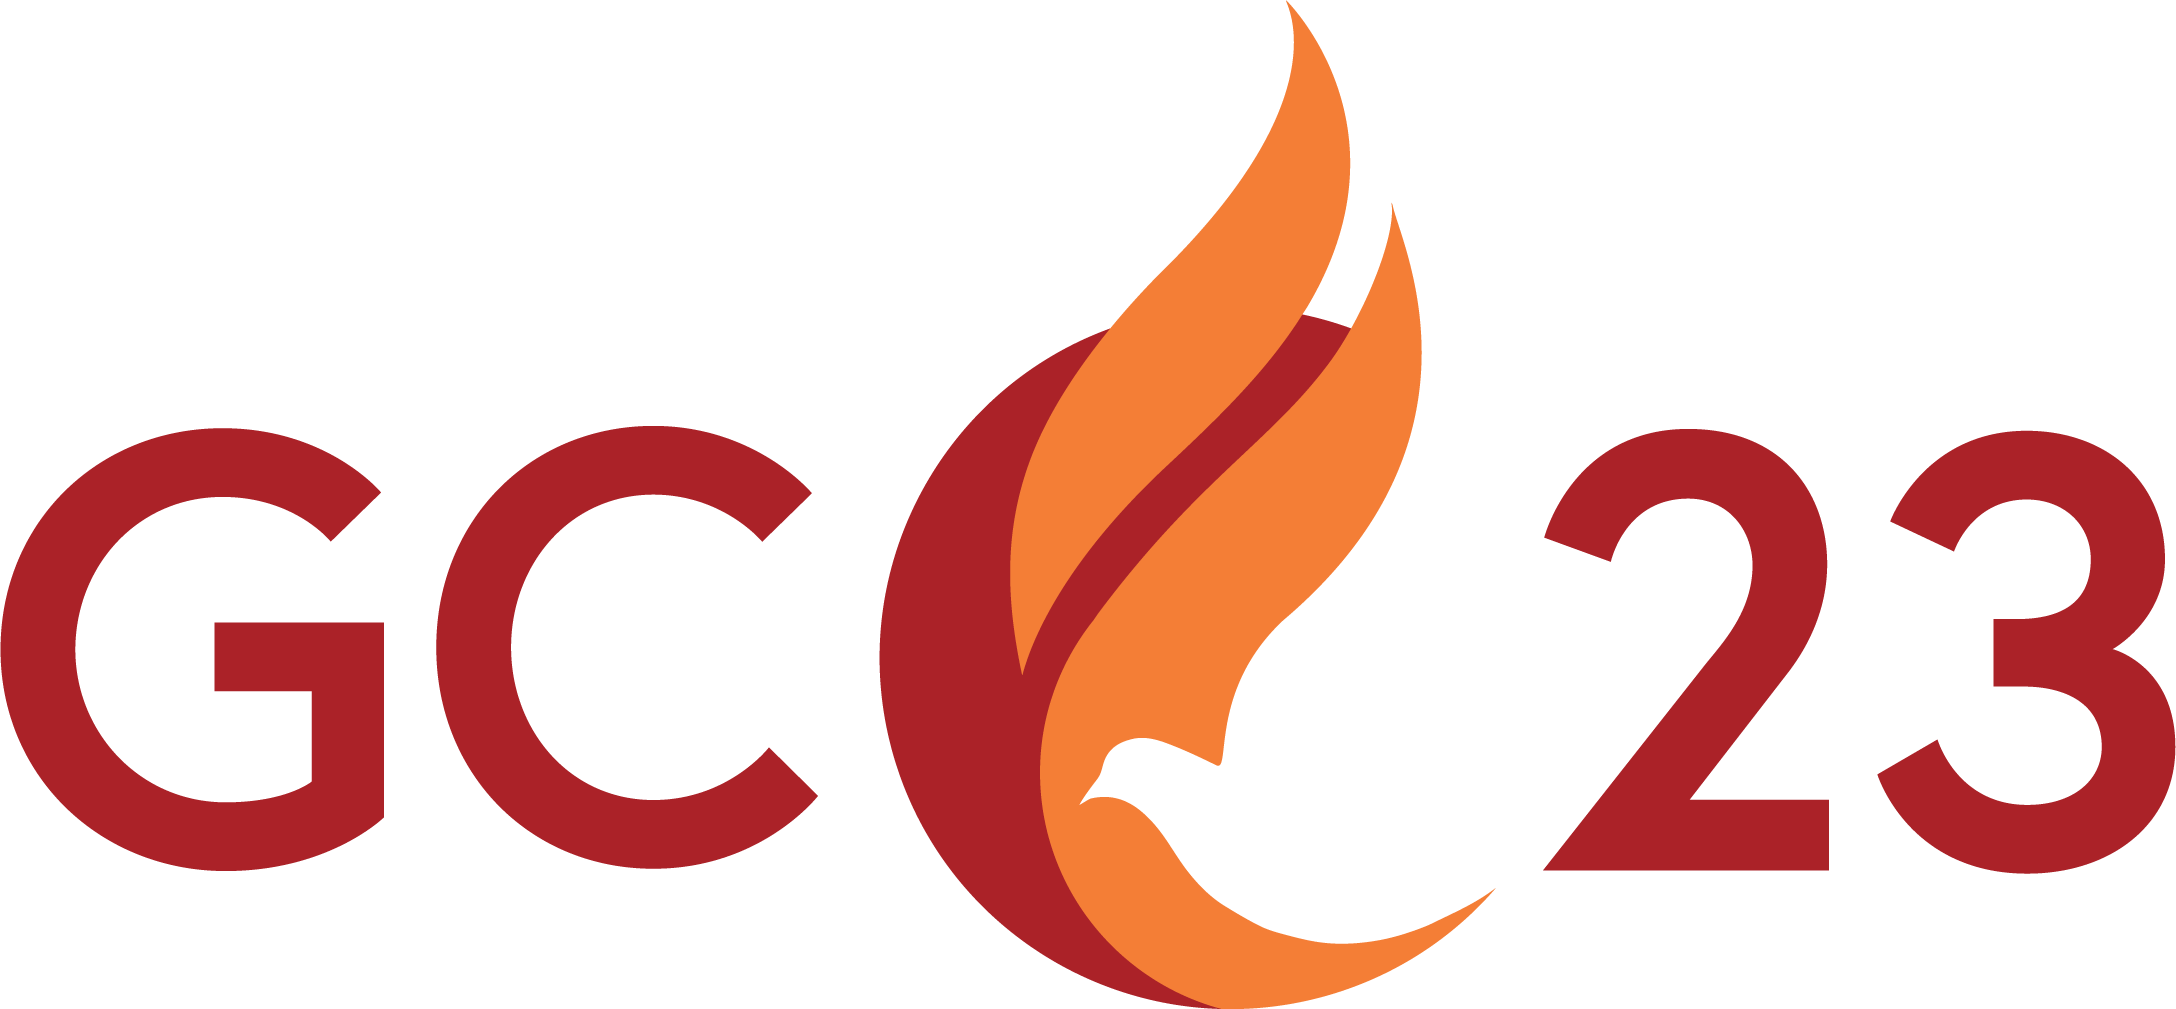 GC 23 with red-orange flame logo